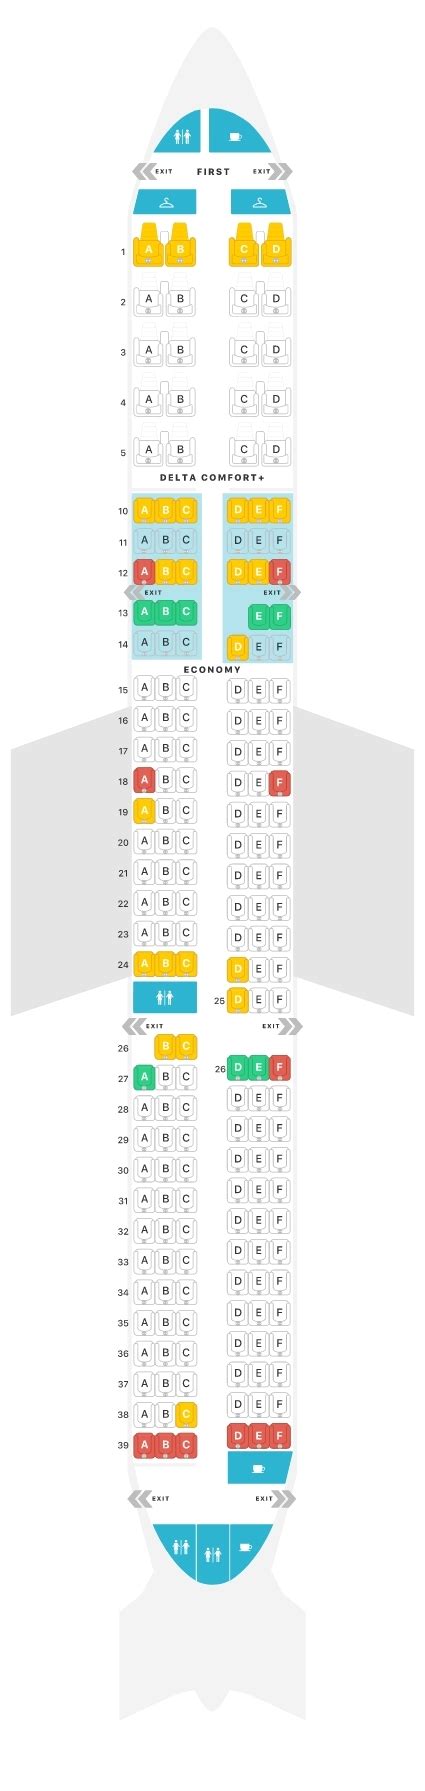 Delta A321 Seat Map — How To Choose The Best Seats Guide